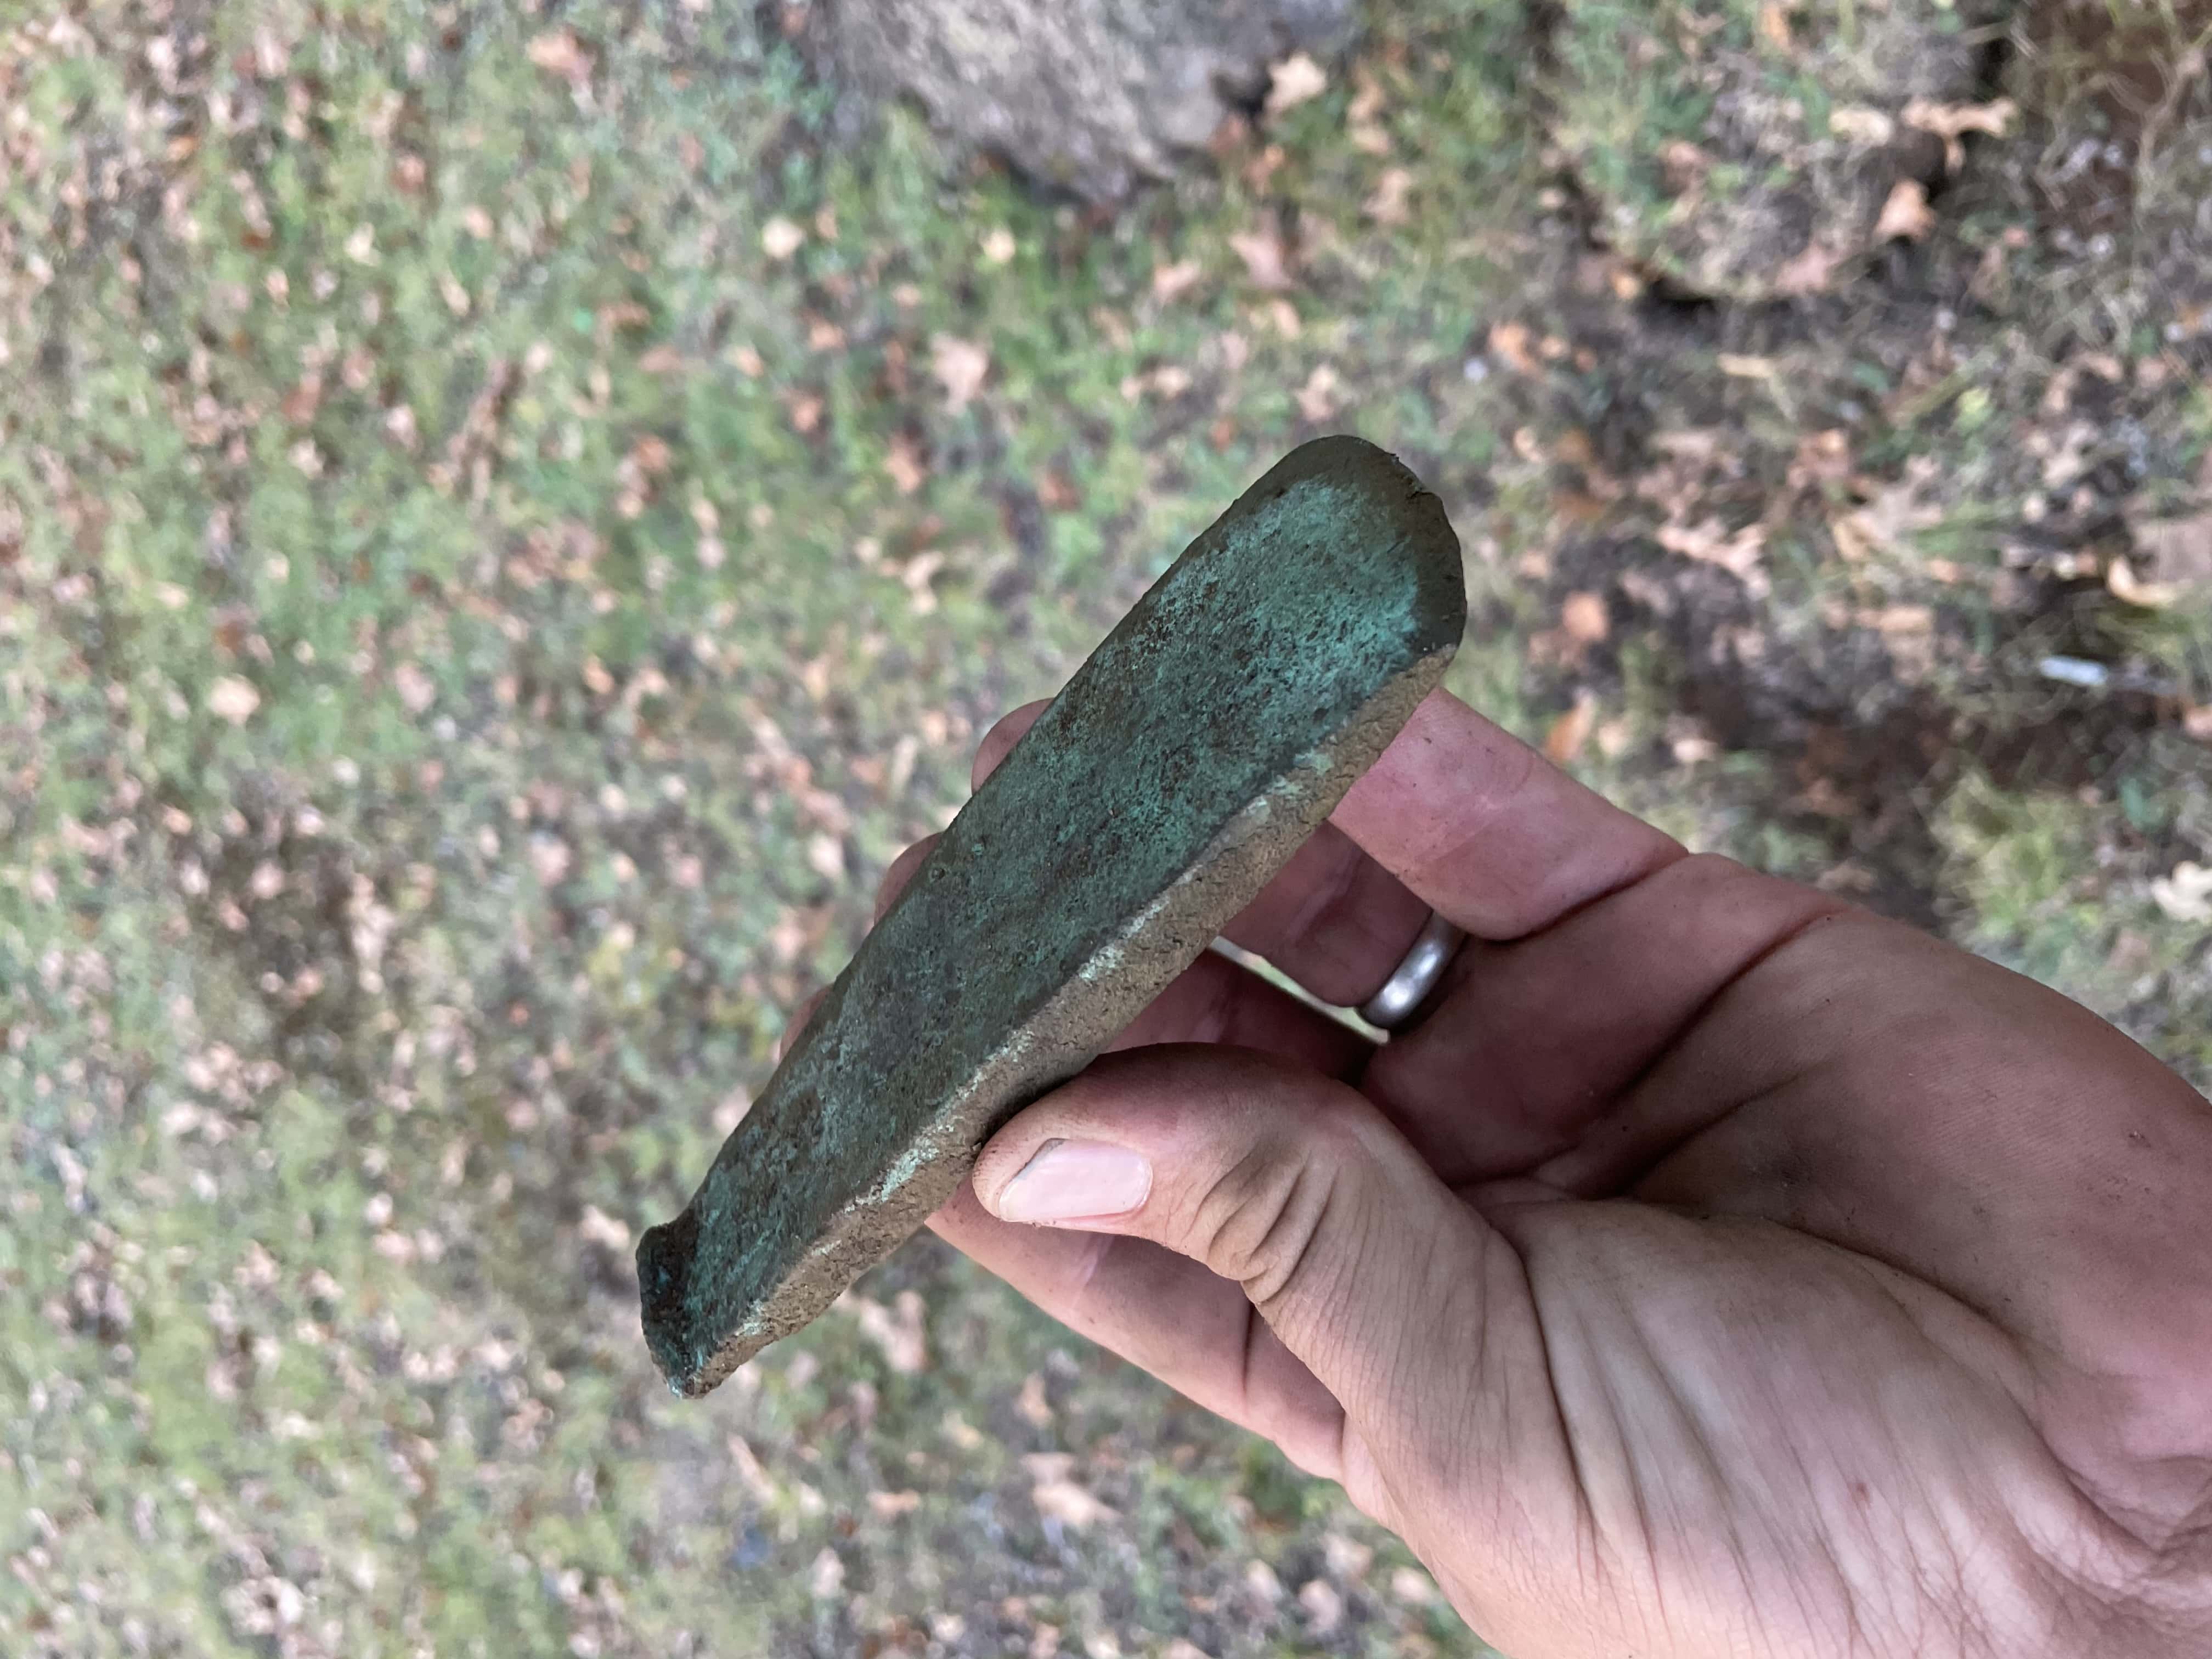 Prehistoric Copper Implement with Green Patina Across Surface Held in a Hand with Grassy Park and Tree Blurry in Background